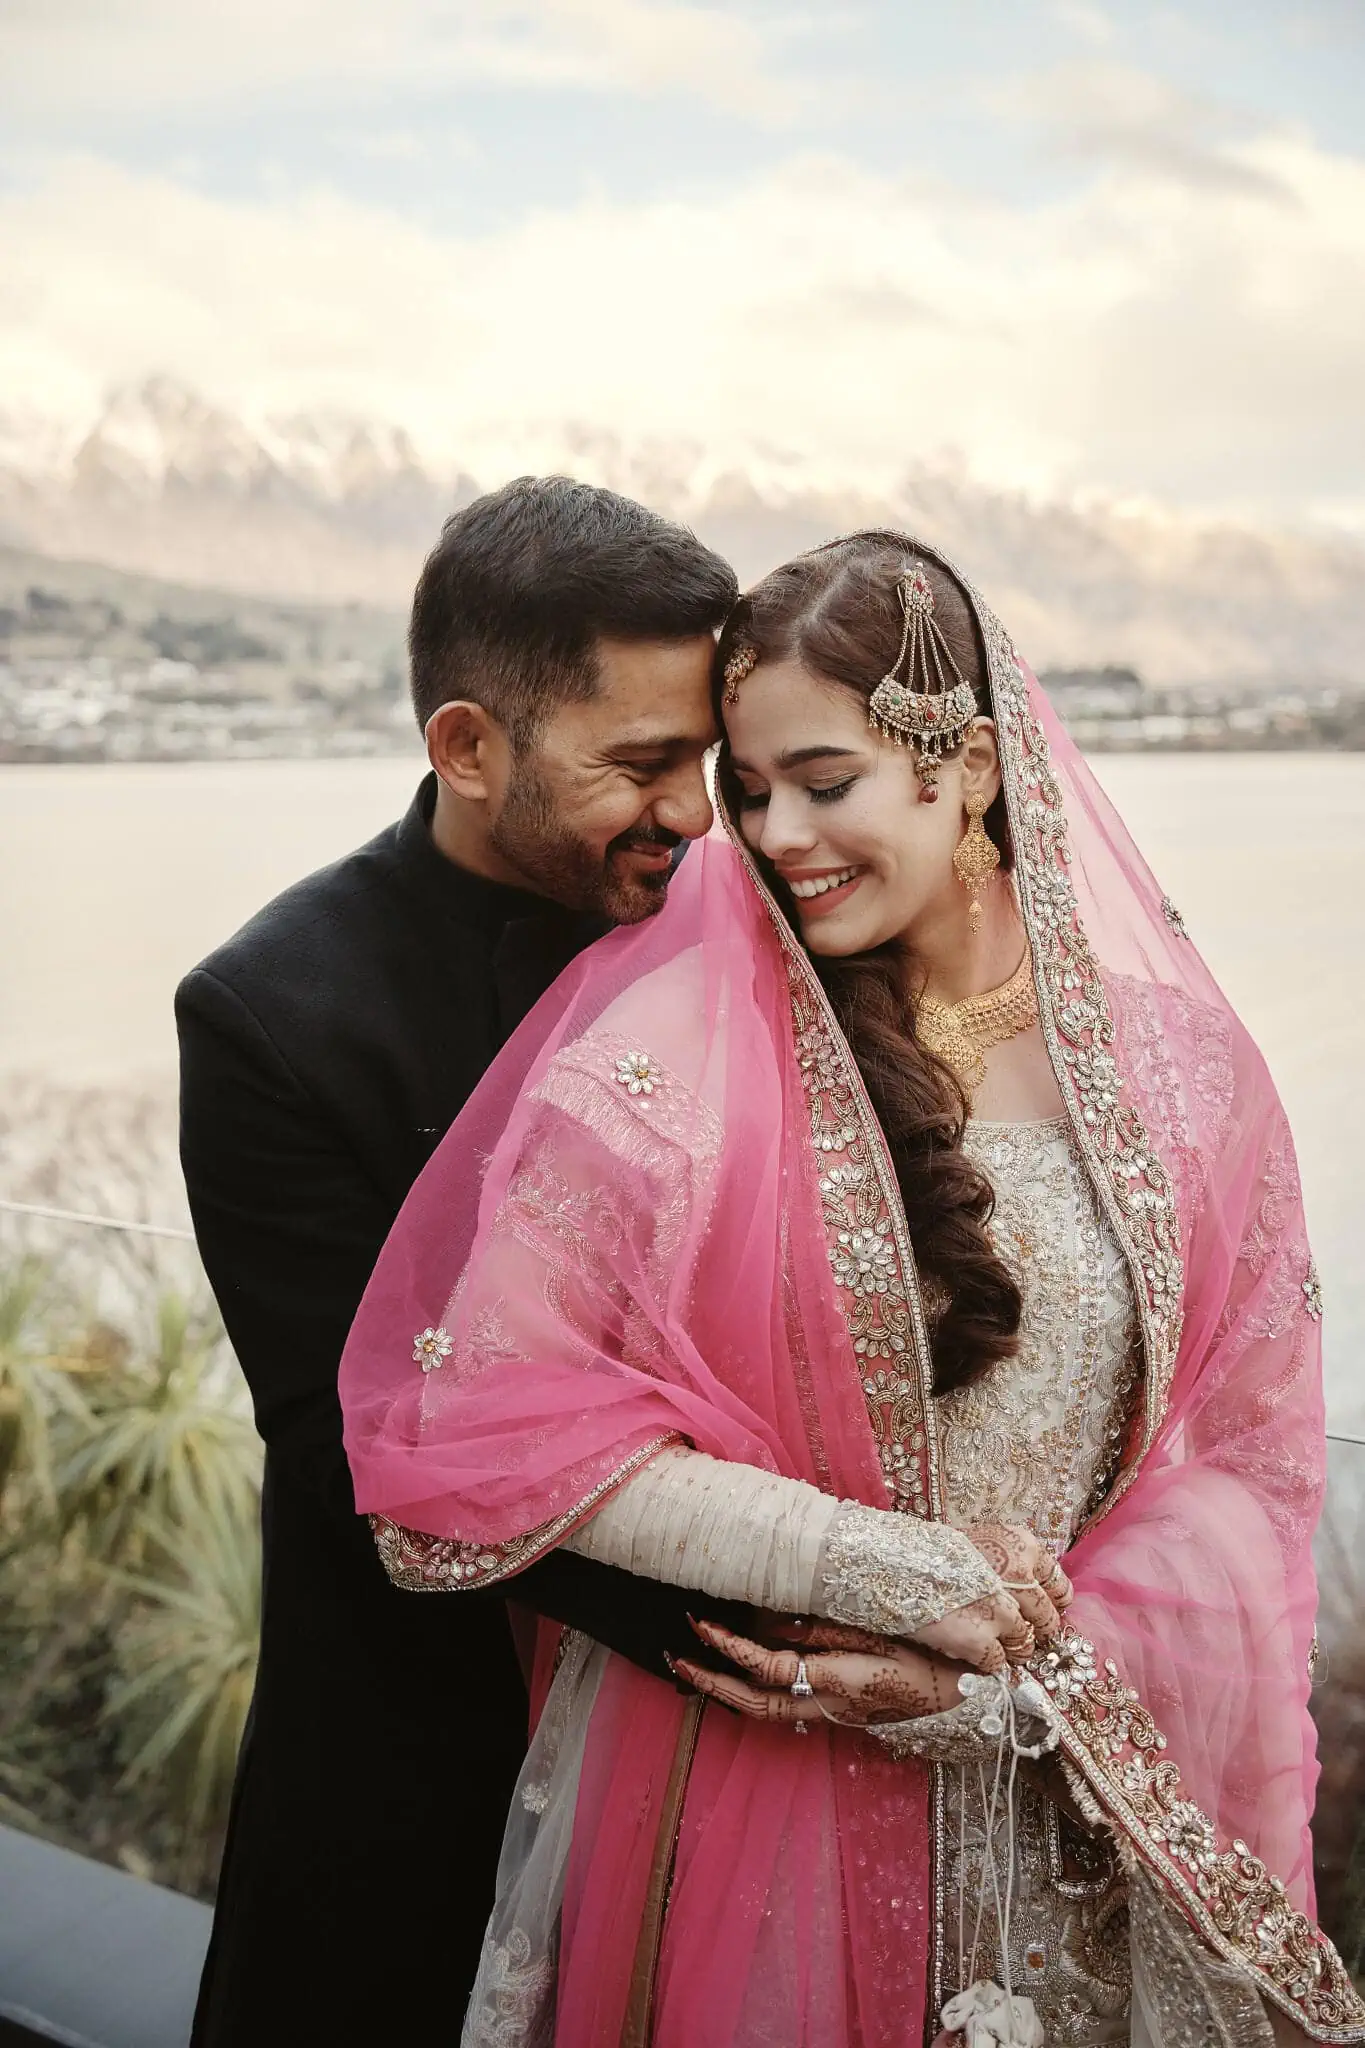 Queenstown New Zealand Elopement Wedding Photographer - A Queenstown Islamic wedding captures Wasim and Yumn's embrace in front of a picturesque lake.